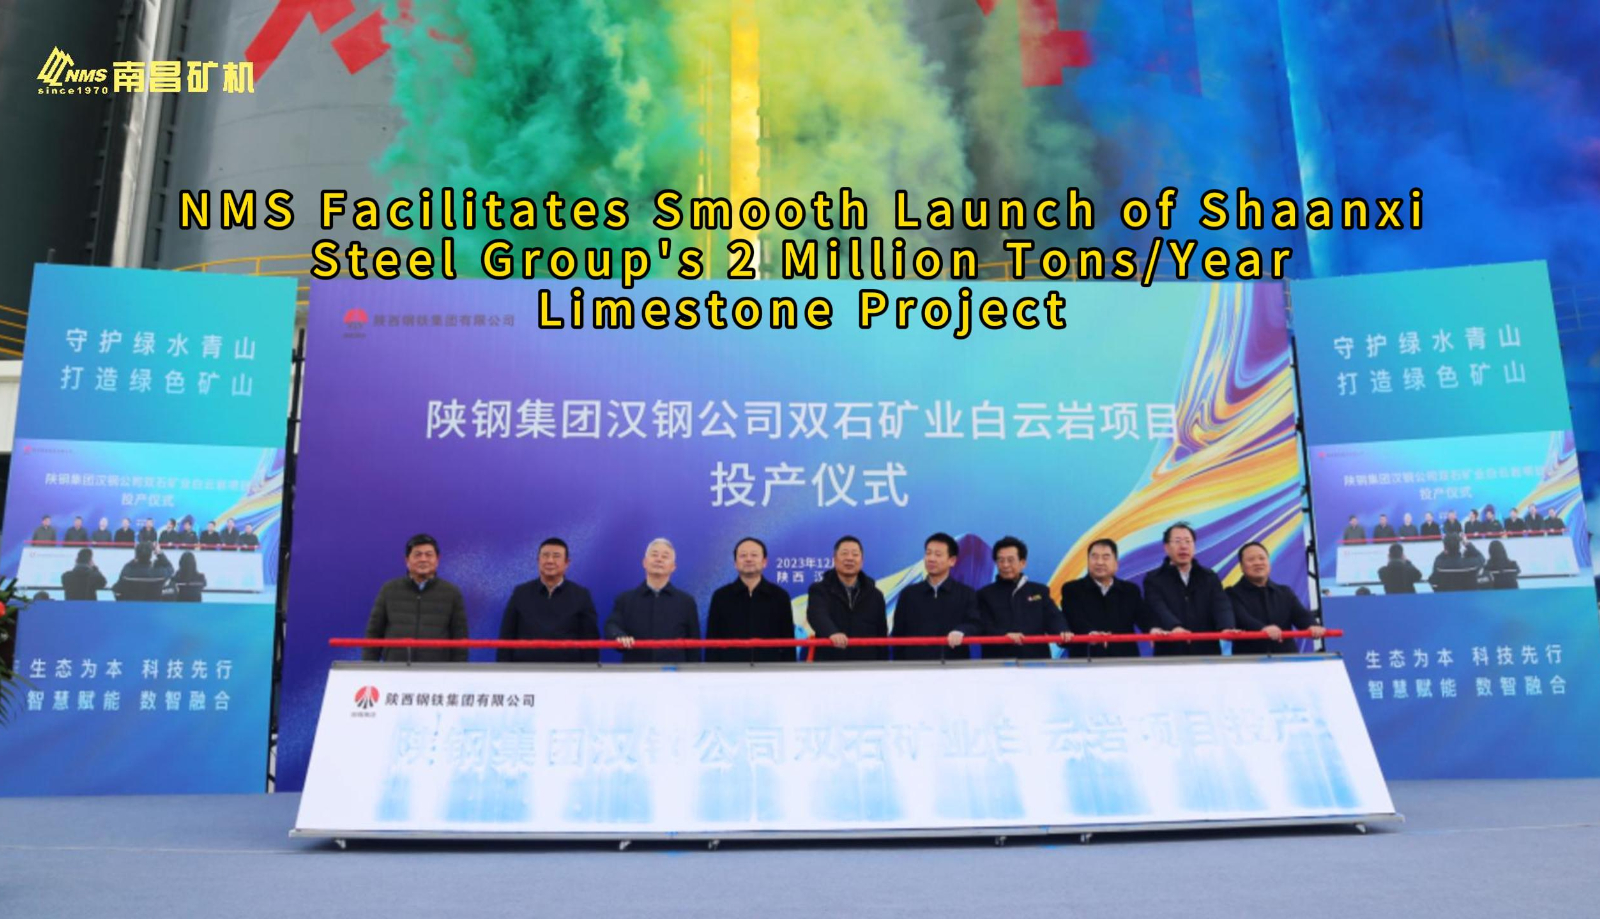 NMS Facilitates Smooth Launch of Shaanxi Steel Group's 2 Million t/a Limestone Project